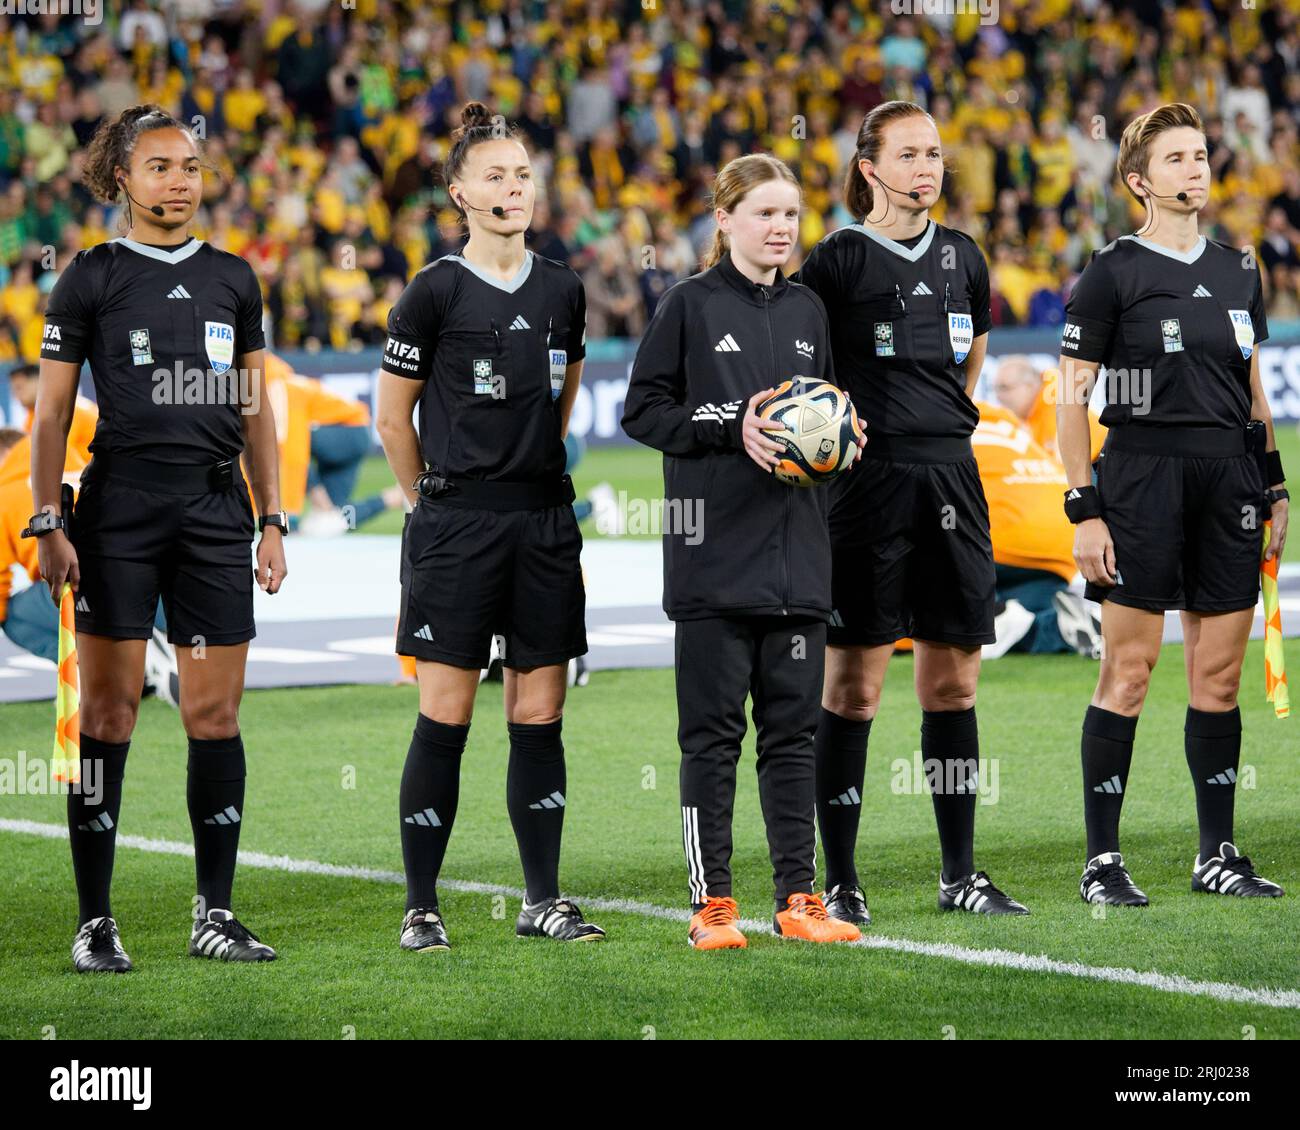 Brisbane, Australia. 19th Aug, 2023. Match referees, Franca Overtoom, Rebecca Welch, Cheryl Foster and Michelle O'Neill line up for the national anthem before the FIFA Women's World Cup Australia and New Zealand 2023 Third Place match between Sweden and Australia at Brisbane Stadium on August 19, 2023 in Brisbane, Australia Credit: IOIO IMAGES/Alamy Live News Stock Photo